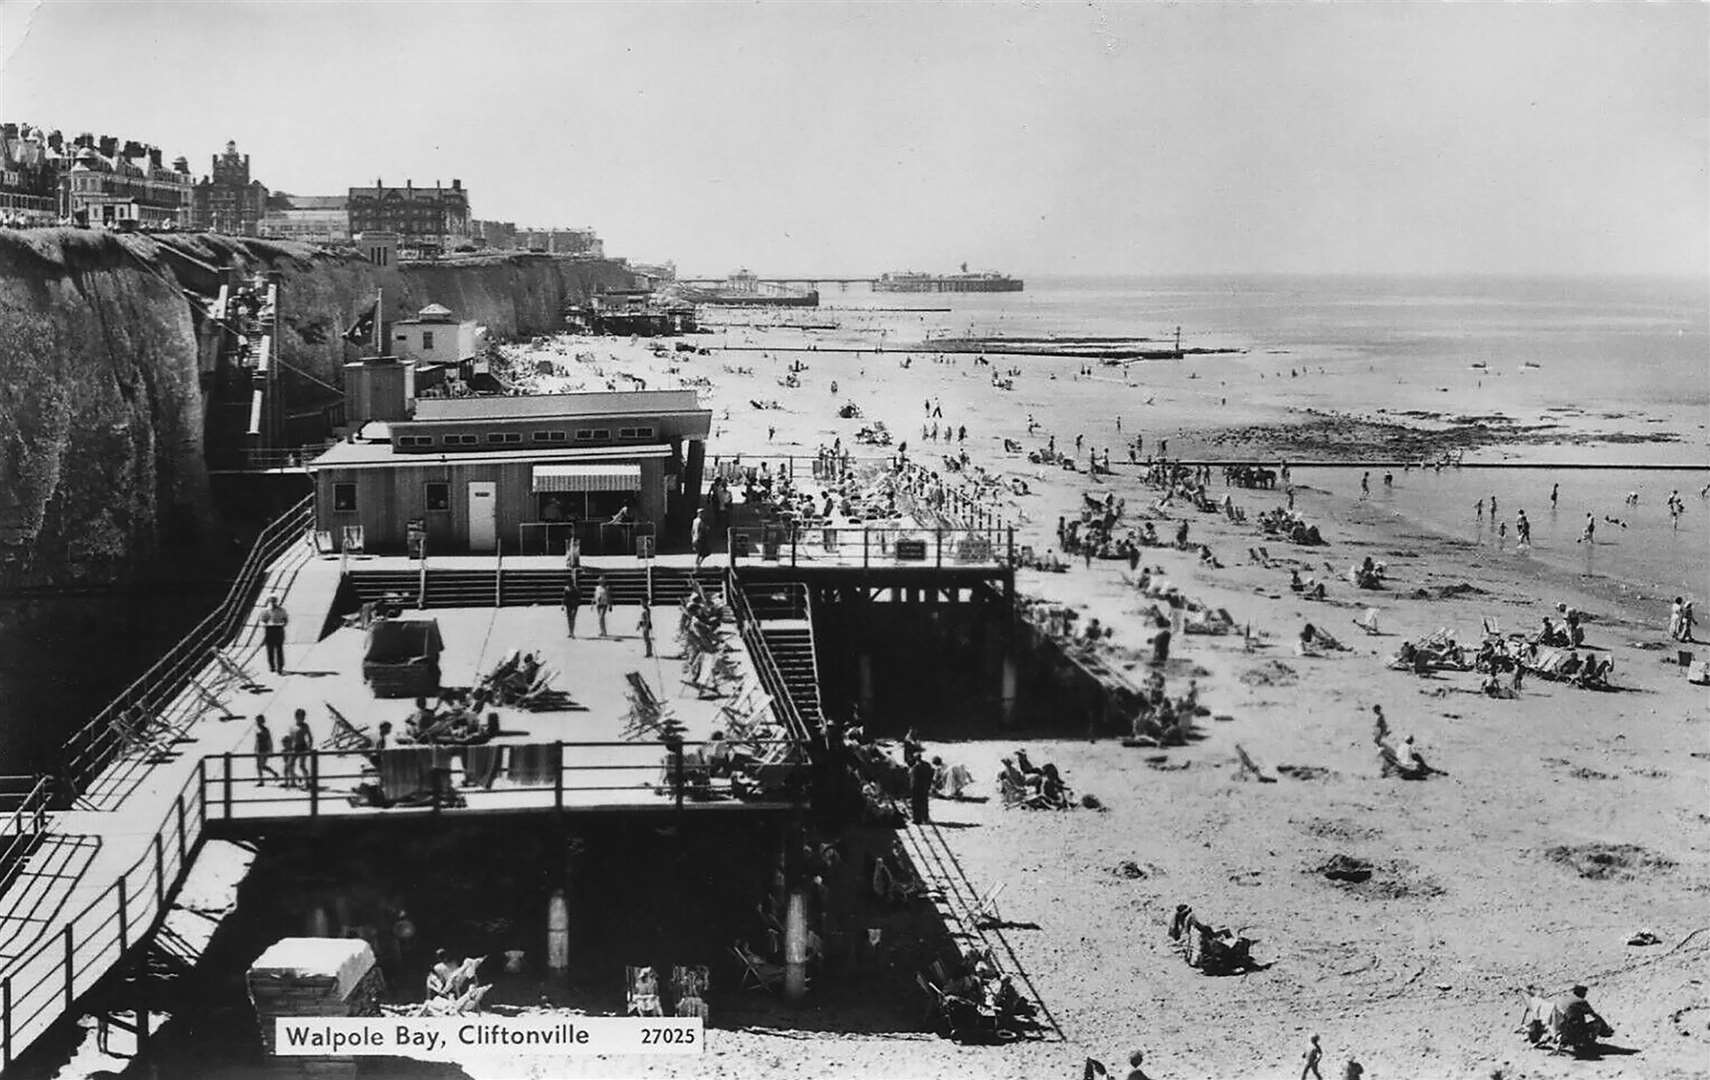 The pavilion and facilities at Walpole Bay in the 1920s - it was destroyed by storms in the 1950s. Picture: Nick Evans